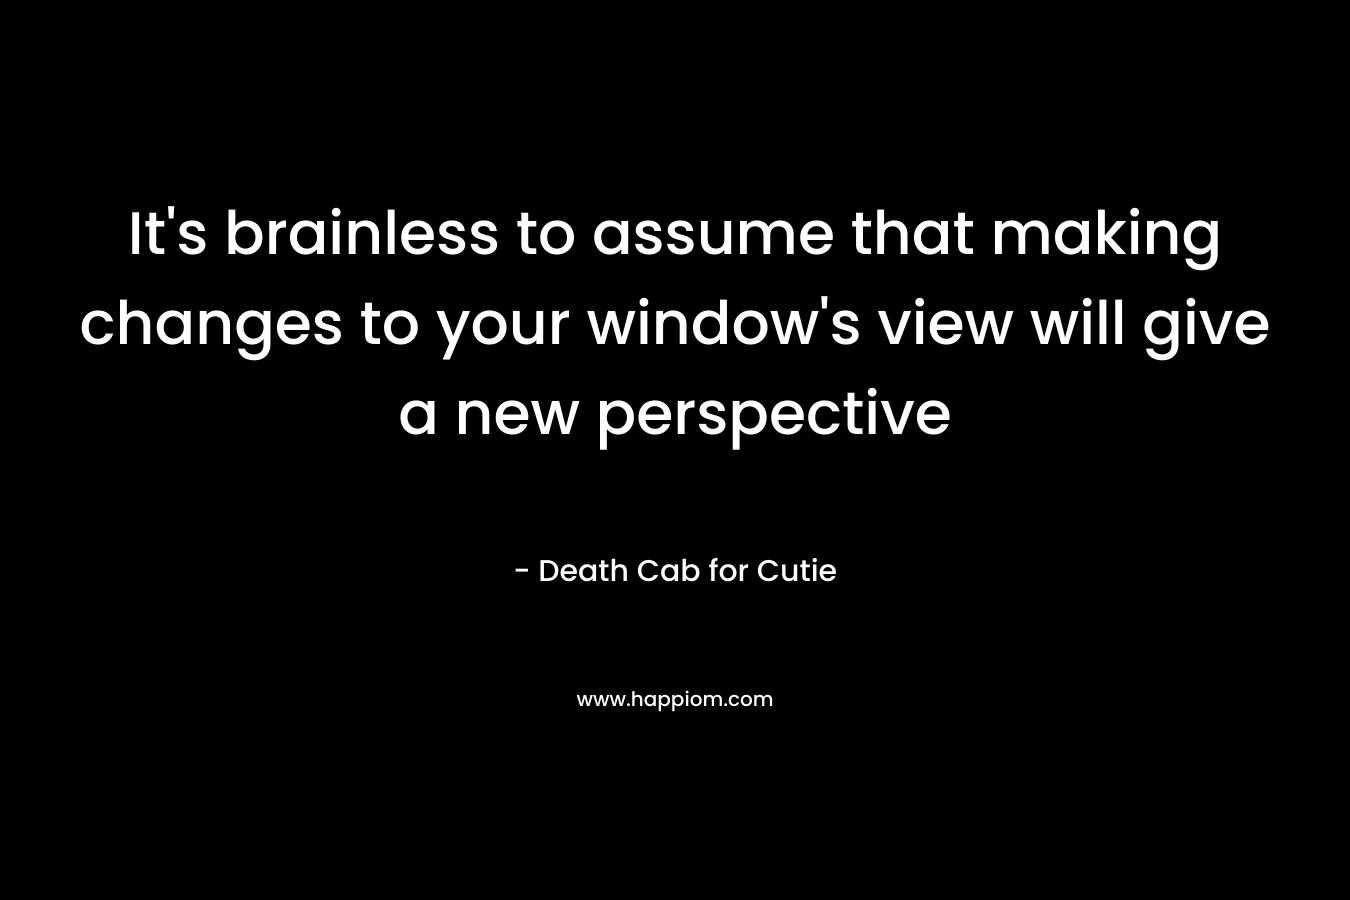 It's brainless to assume that making changes to your window's view will give a new perspective